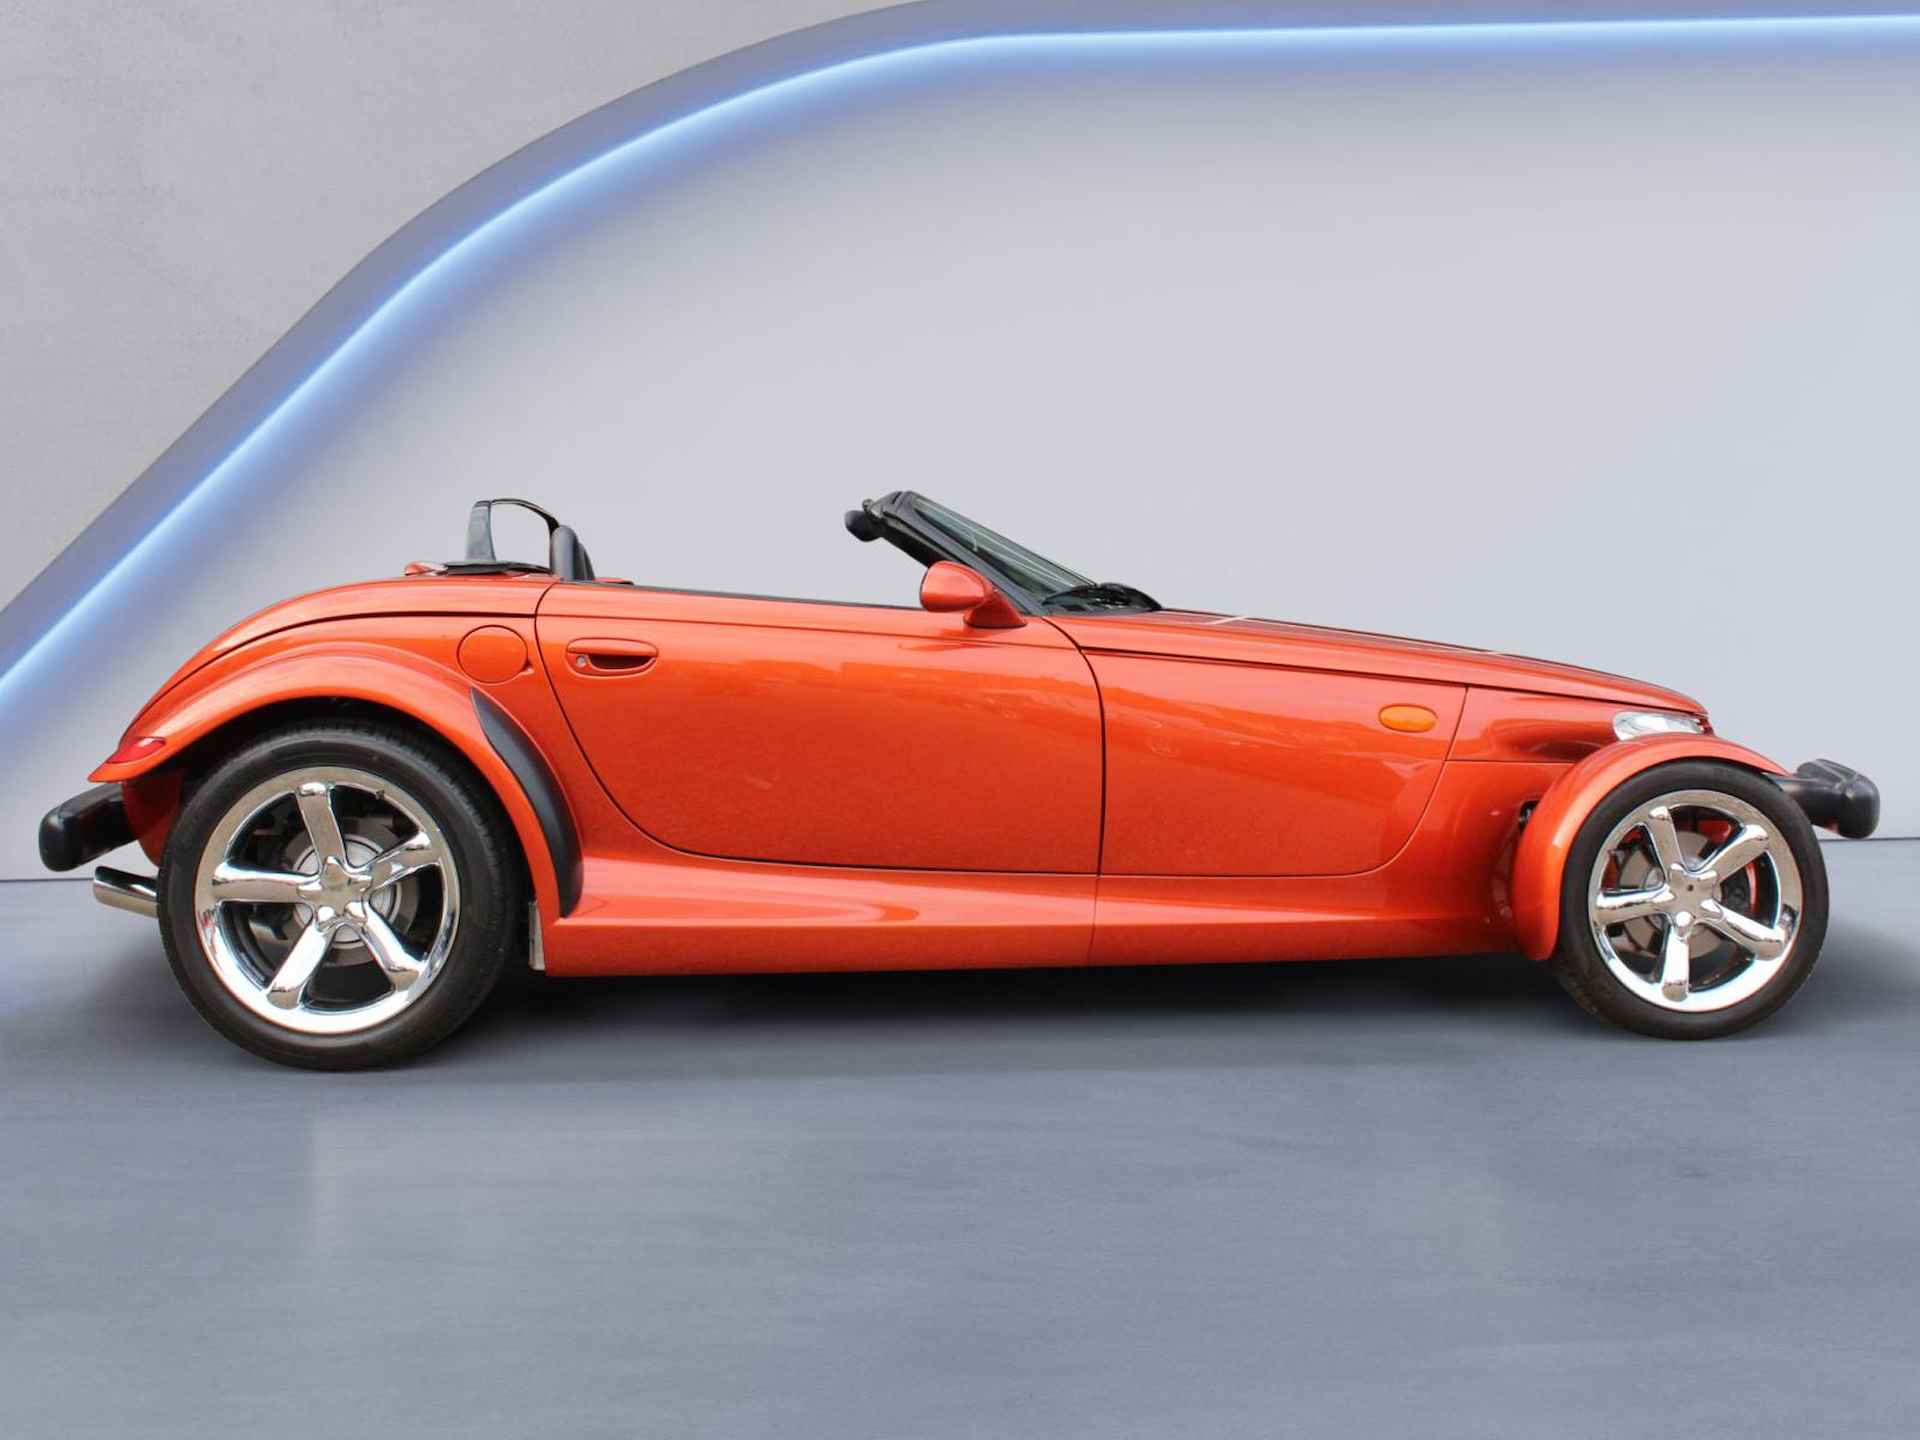 Plymouth Prowler Automaat 3.5i-V6 Youngtimer Nieuwe Cabriokap, Wind scherm Auto is in Concoursstaat. - 5/17